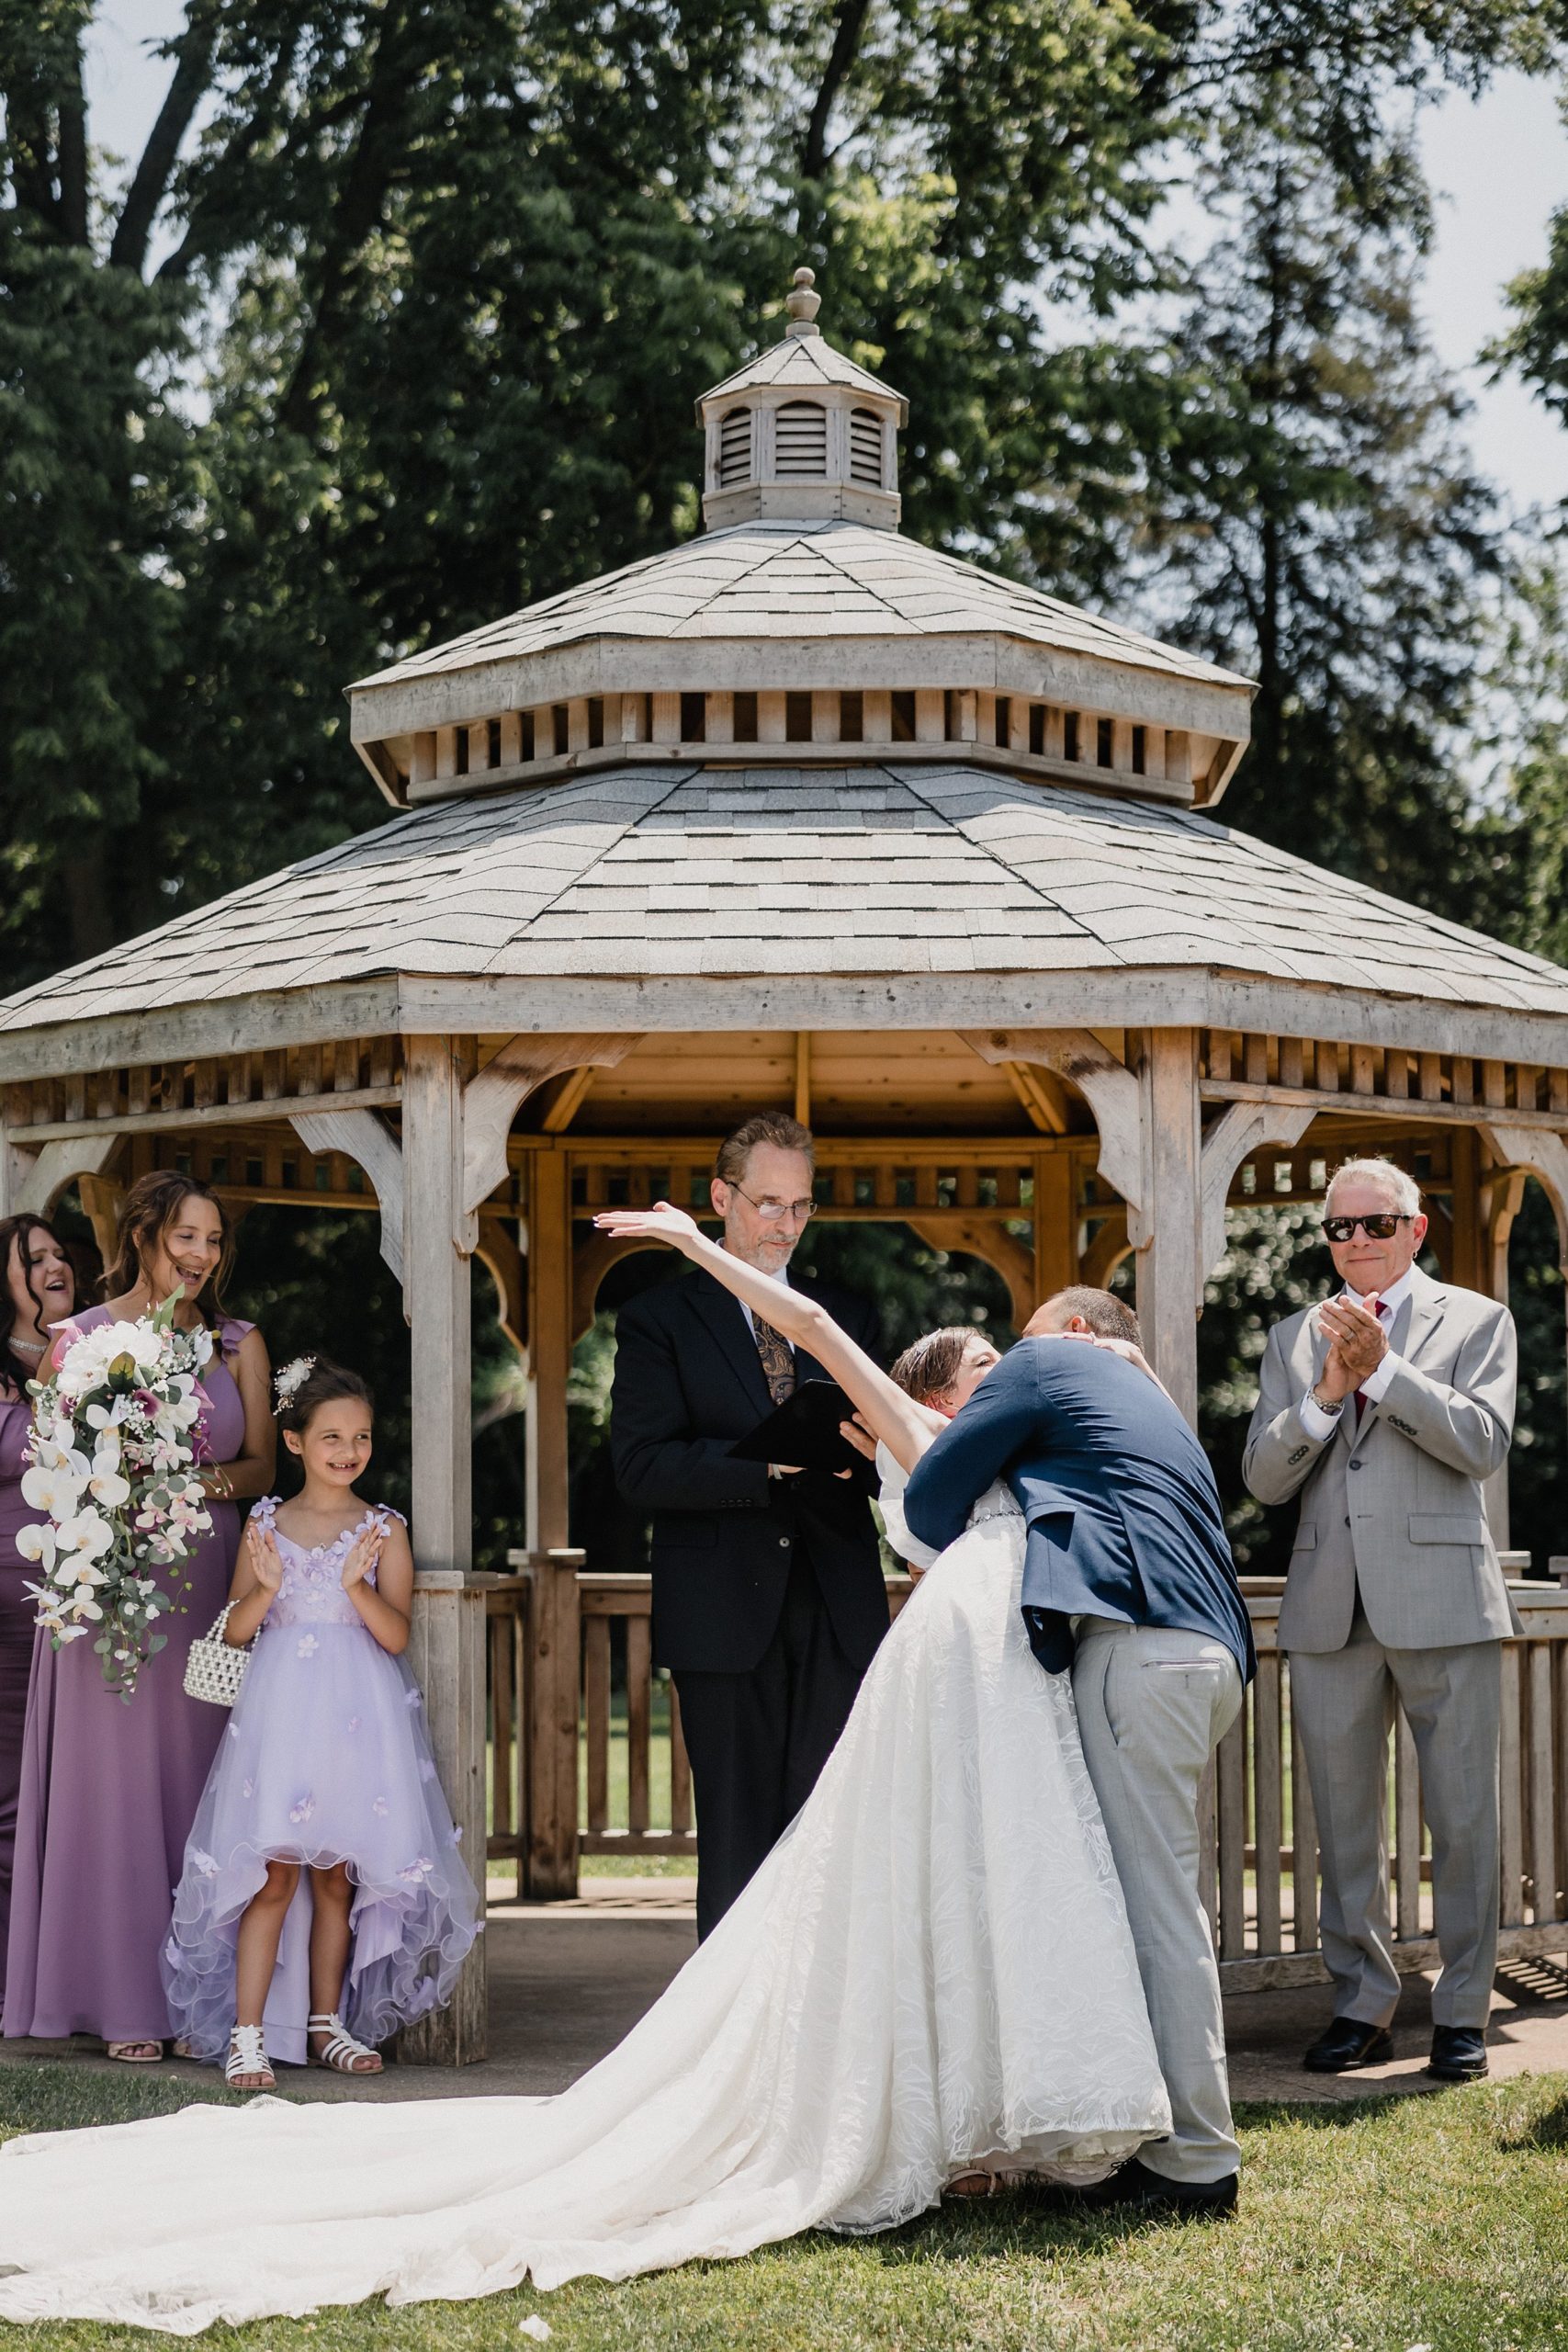 Bride and groom share a first kiss during their wedding at the Bird Haven Greenhouse & Conservatory in Joliet, Illinois.